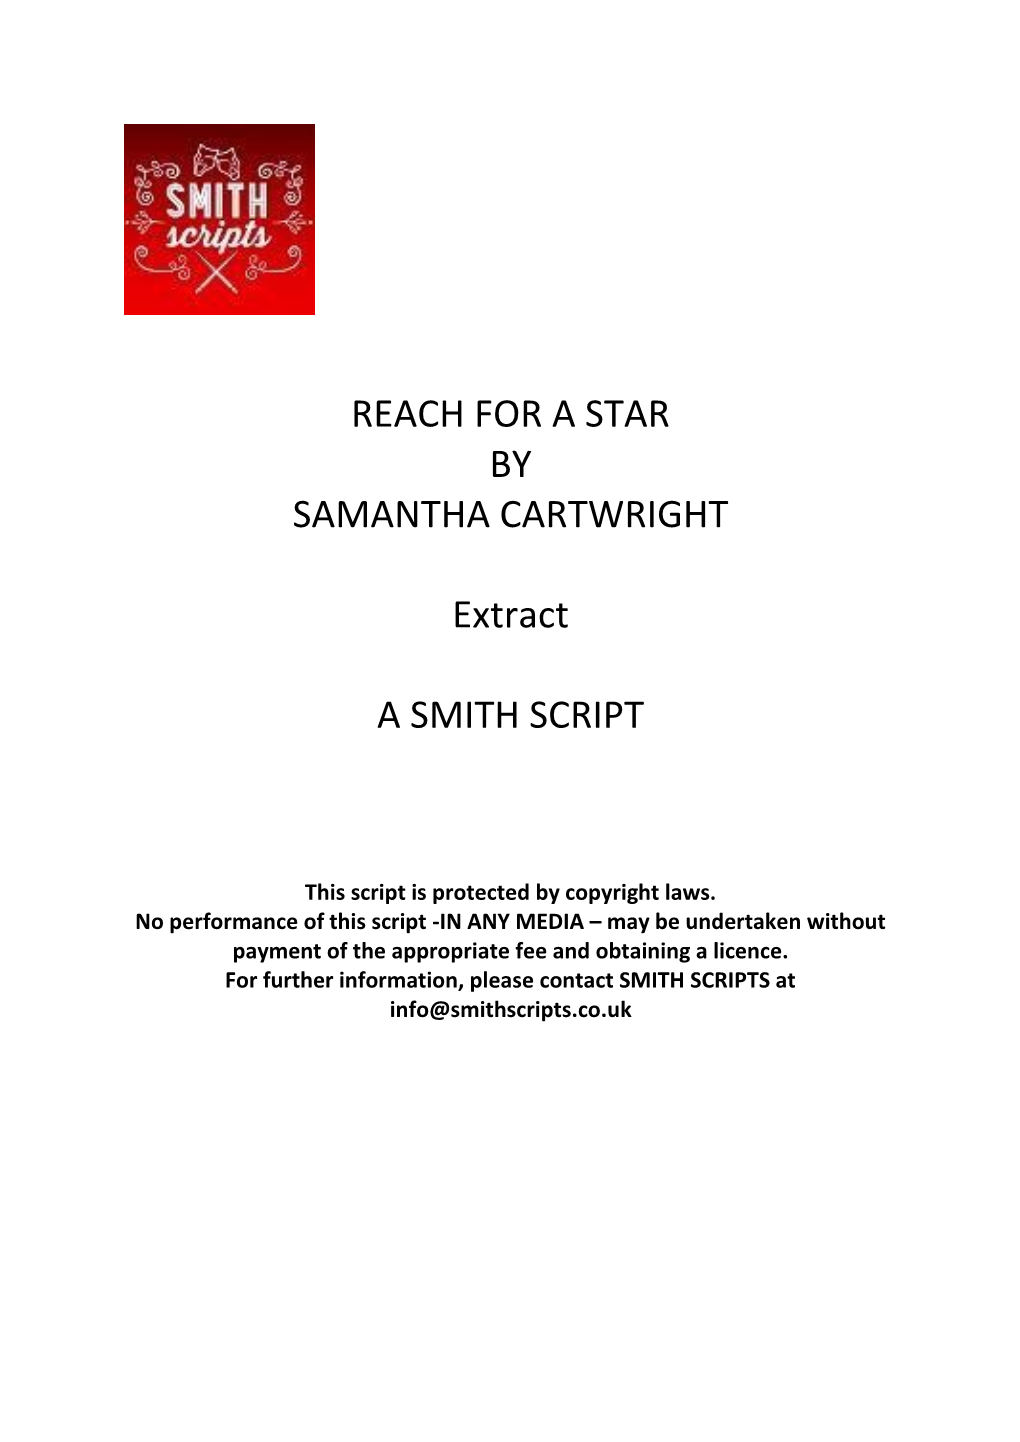 REACH for a STAR by SAMANTHA CARTWRIGHT Extract a SMITH